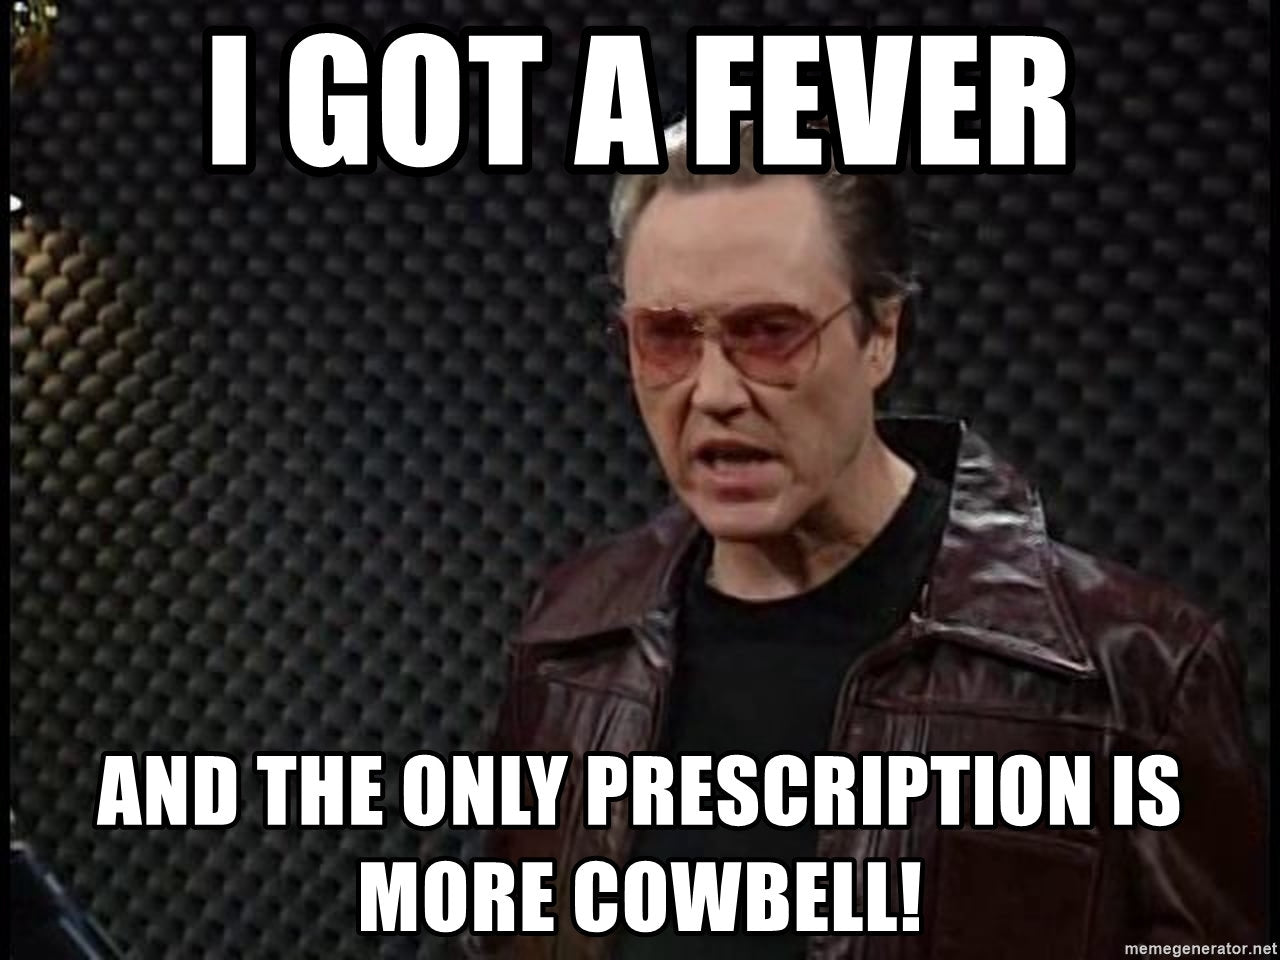 More Cowbell!